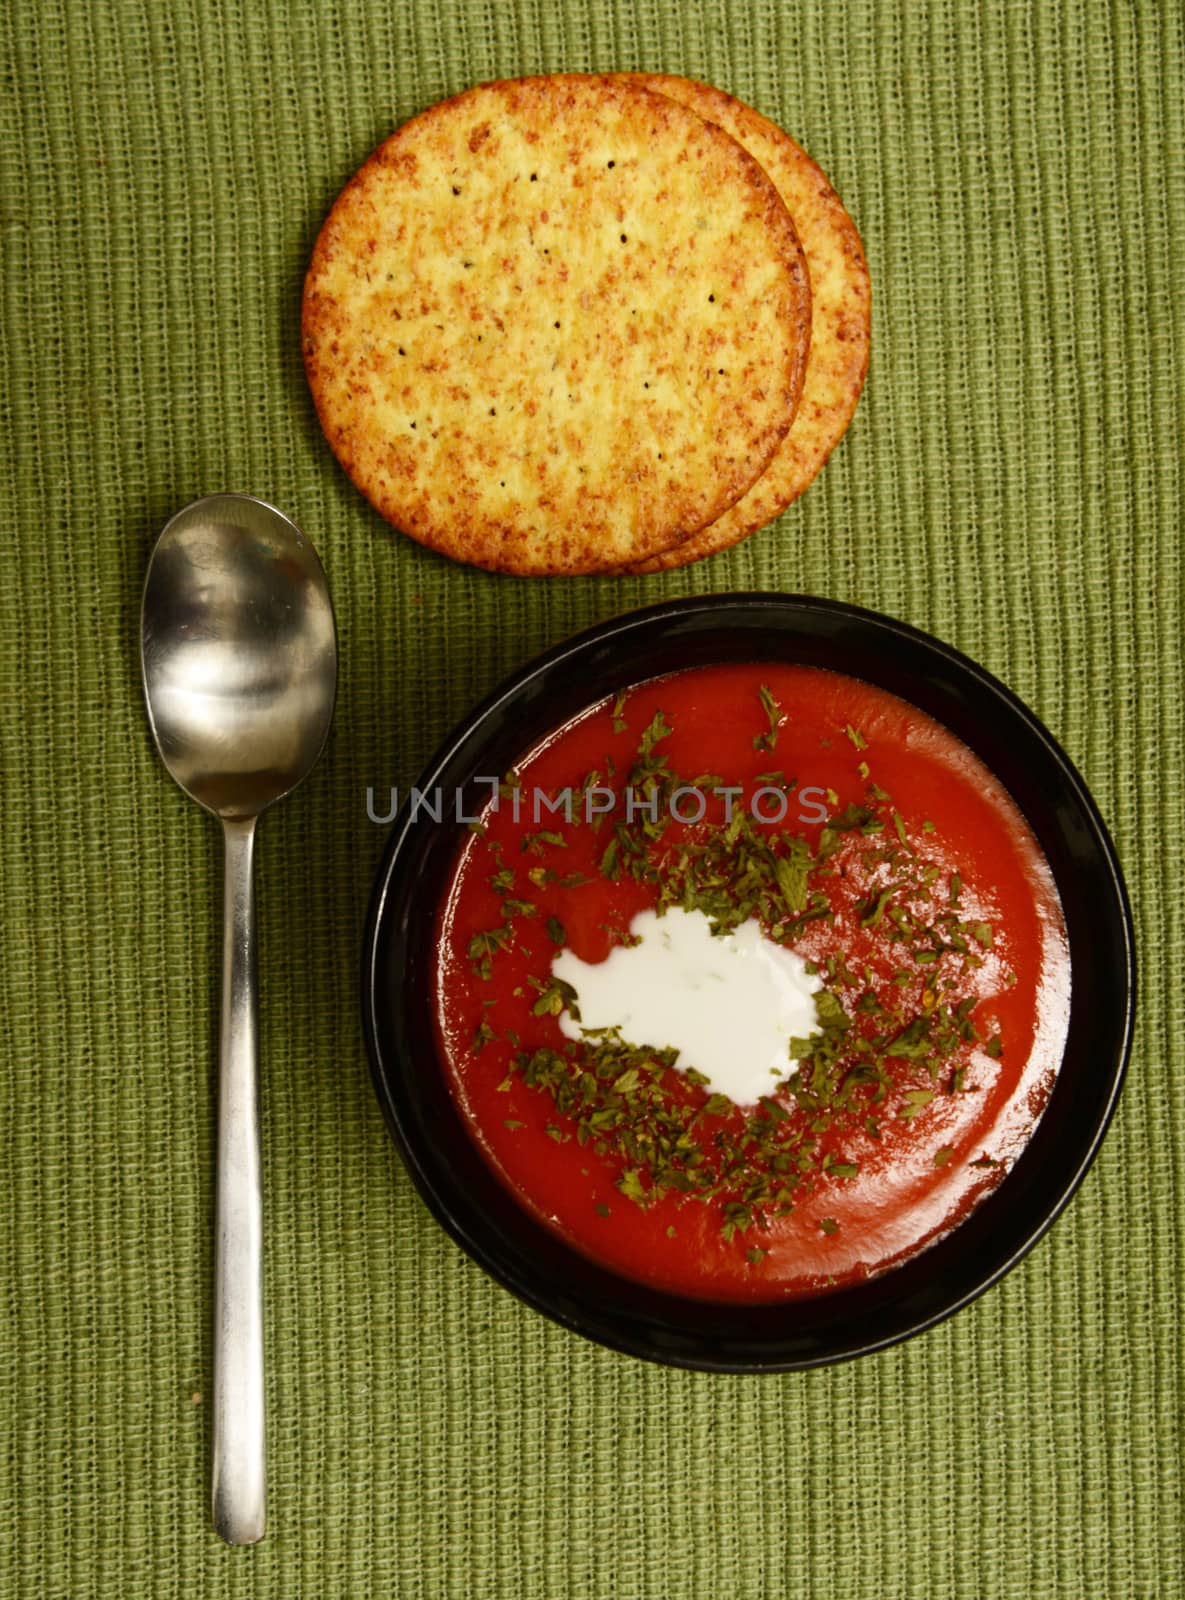 tomato soup on green background with whole grain crackers